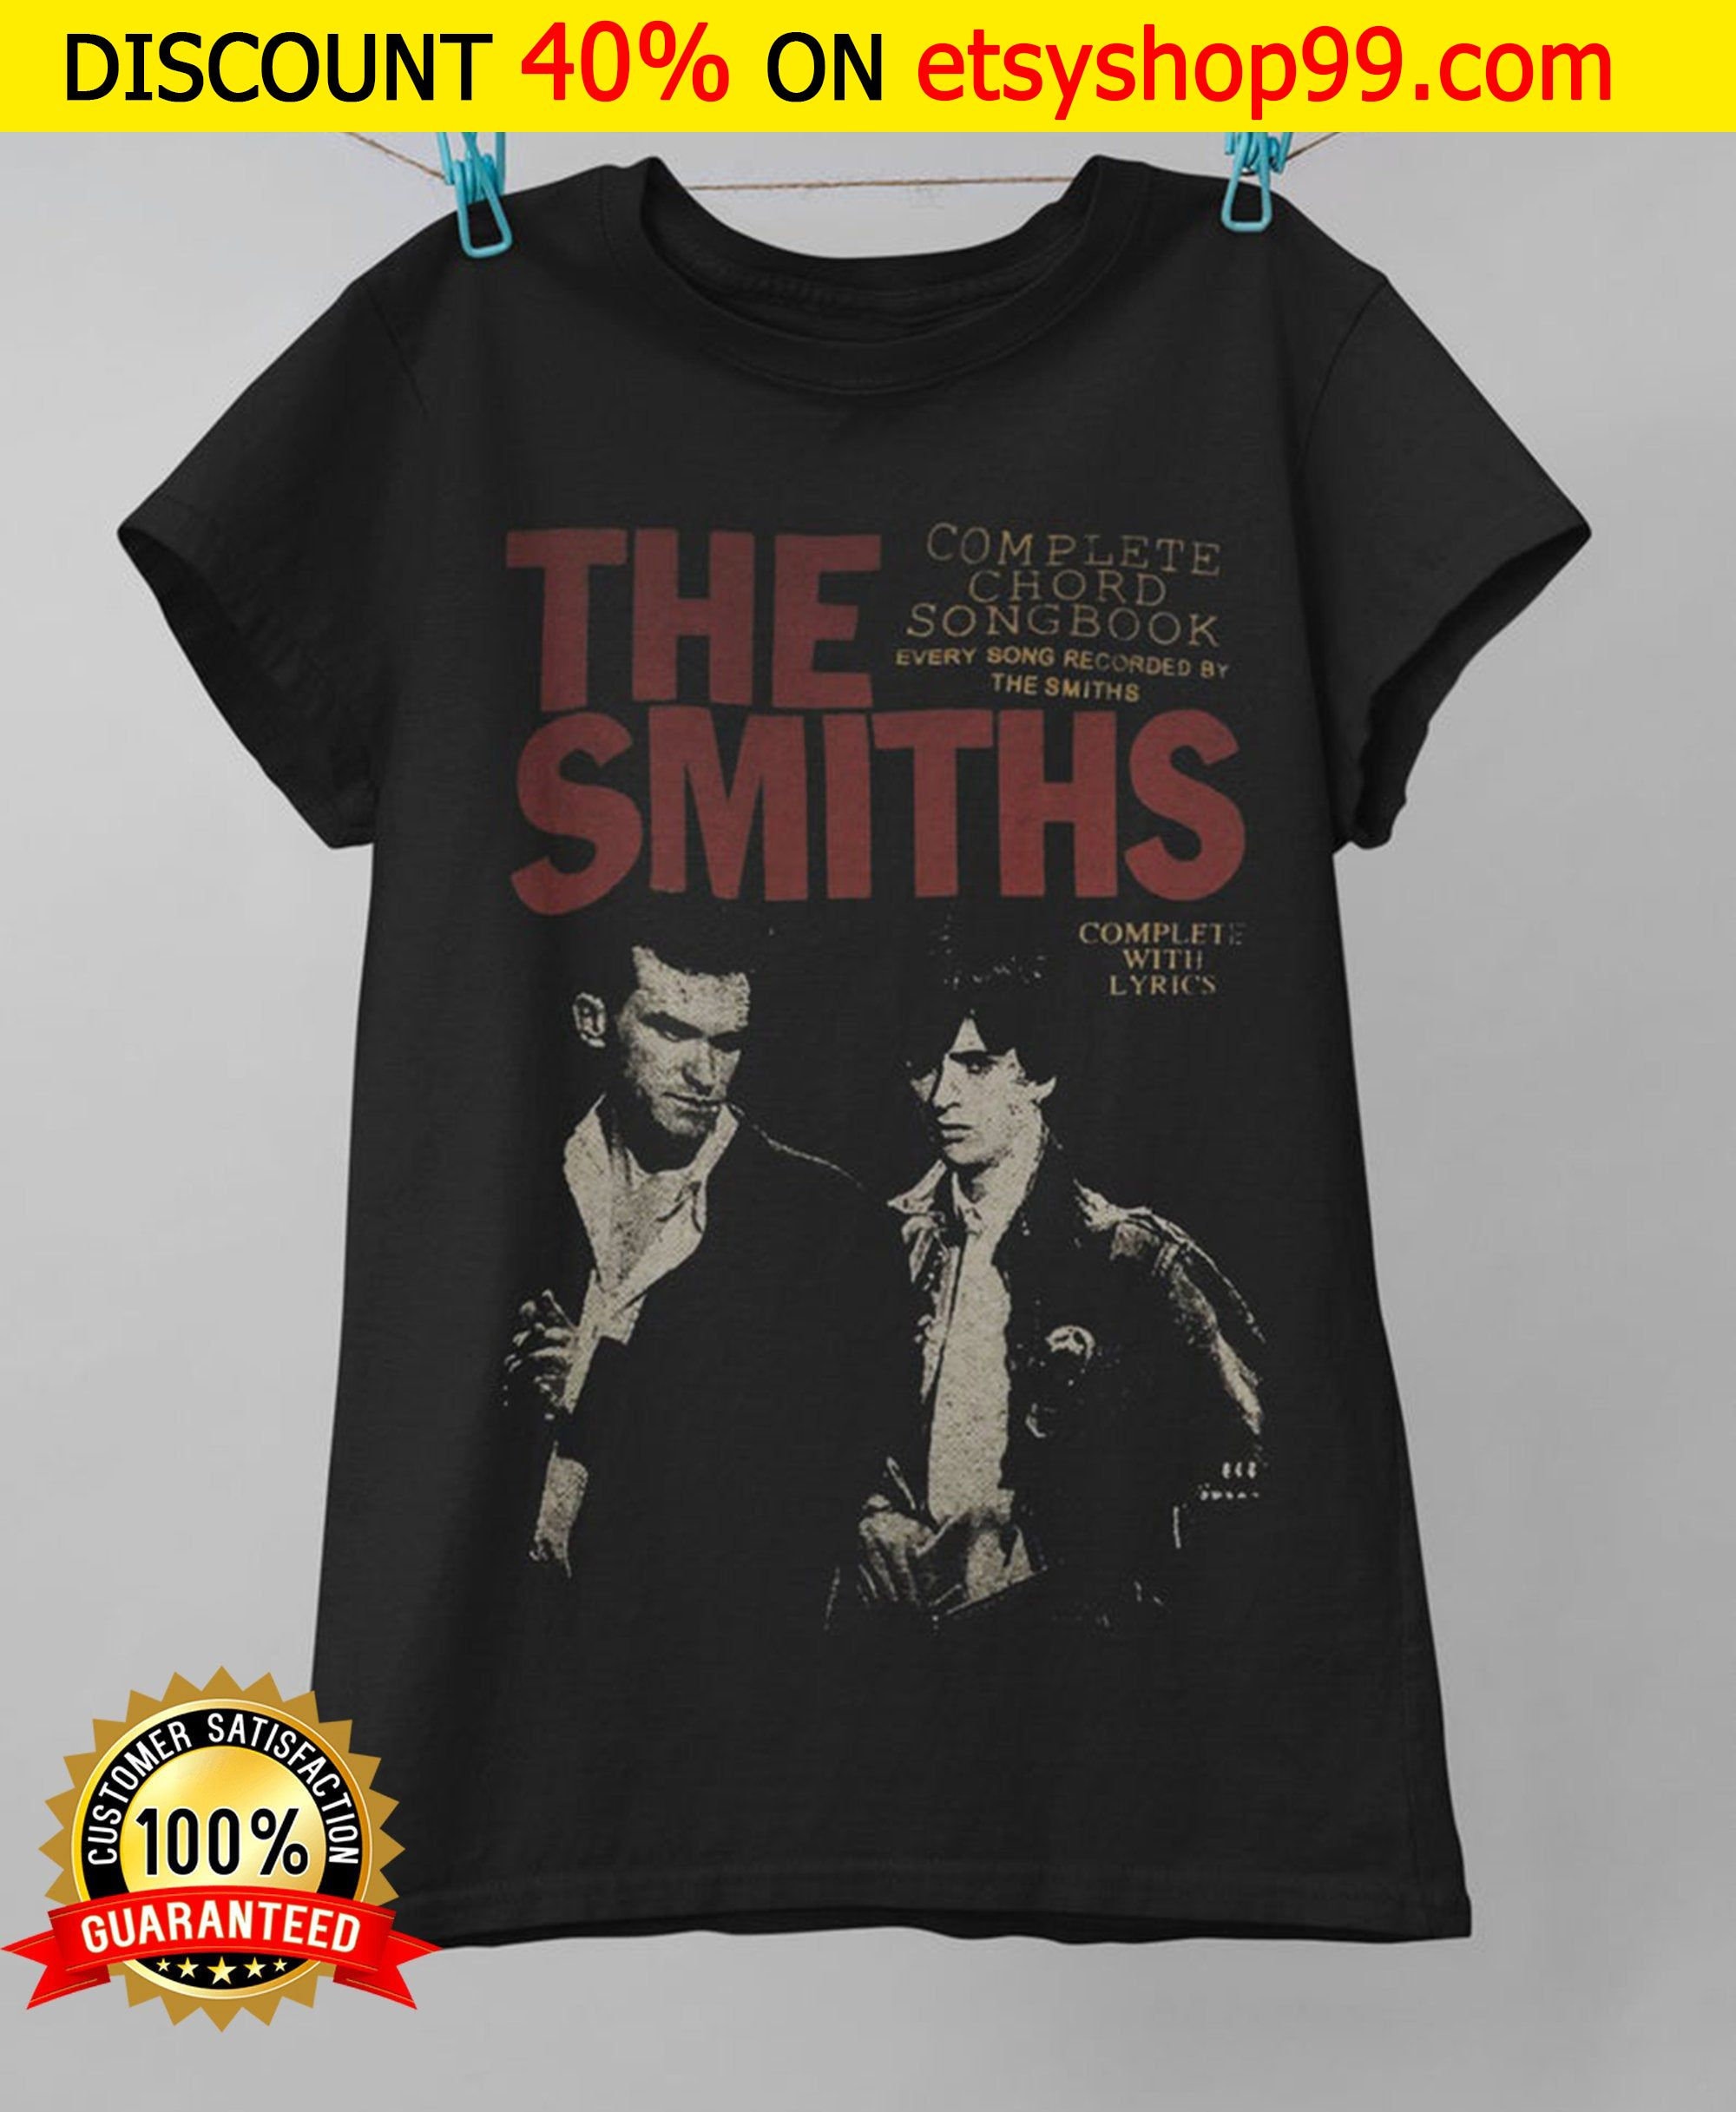 Discover AL298 - The Smiths T-Shirt, The Smiths Vintage Retro Design T-shirt, The Smiths Shirt